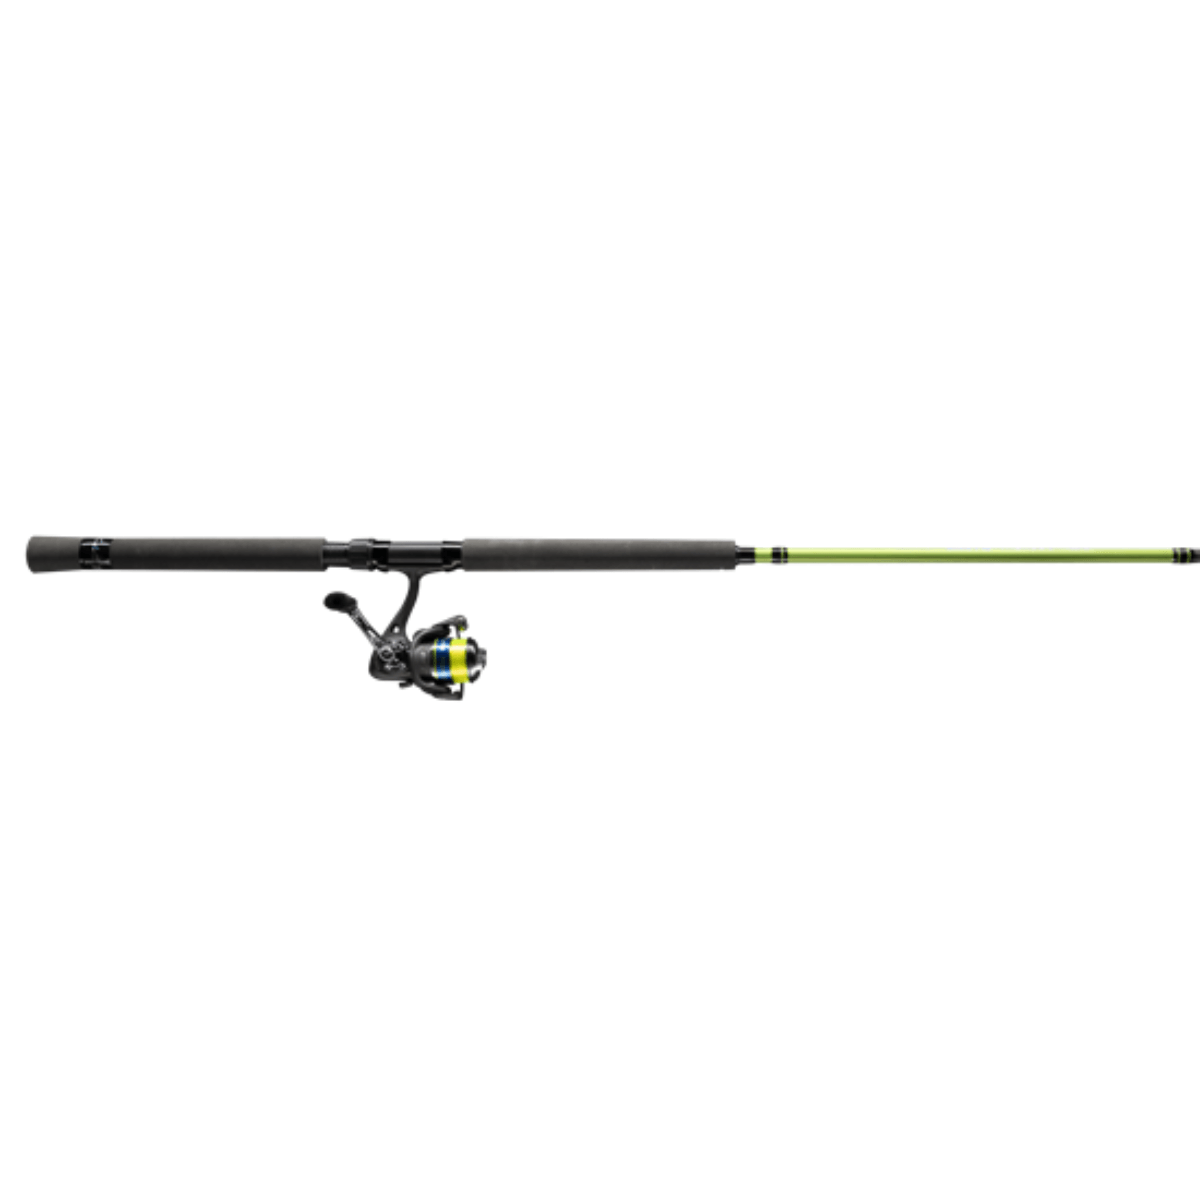 Lew's Crappie Thunder Jig/Troll Spinning Combo - 9' 2 Piece